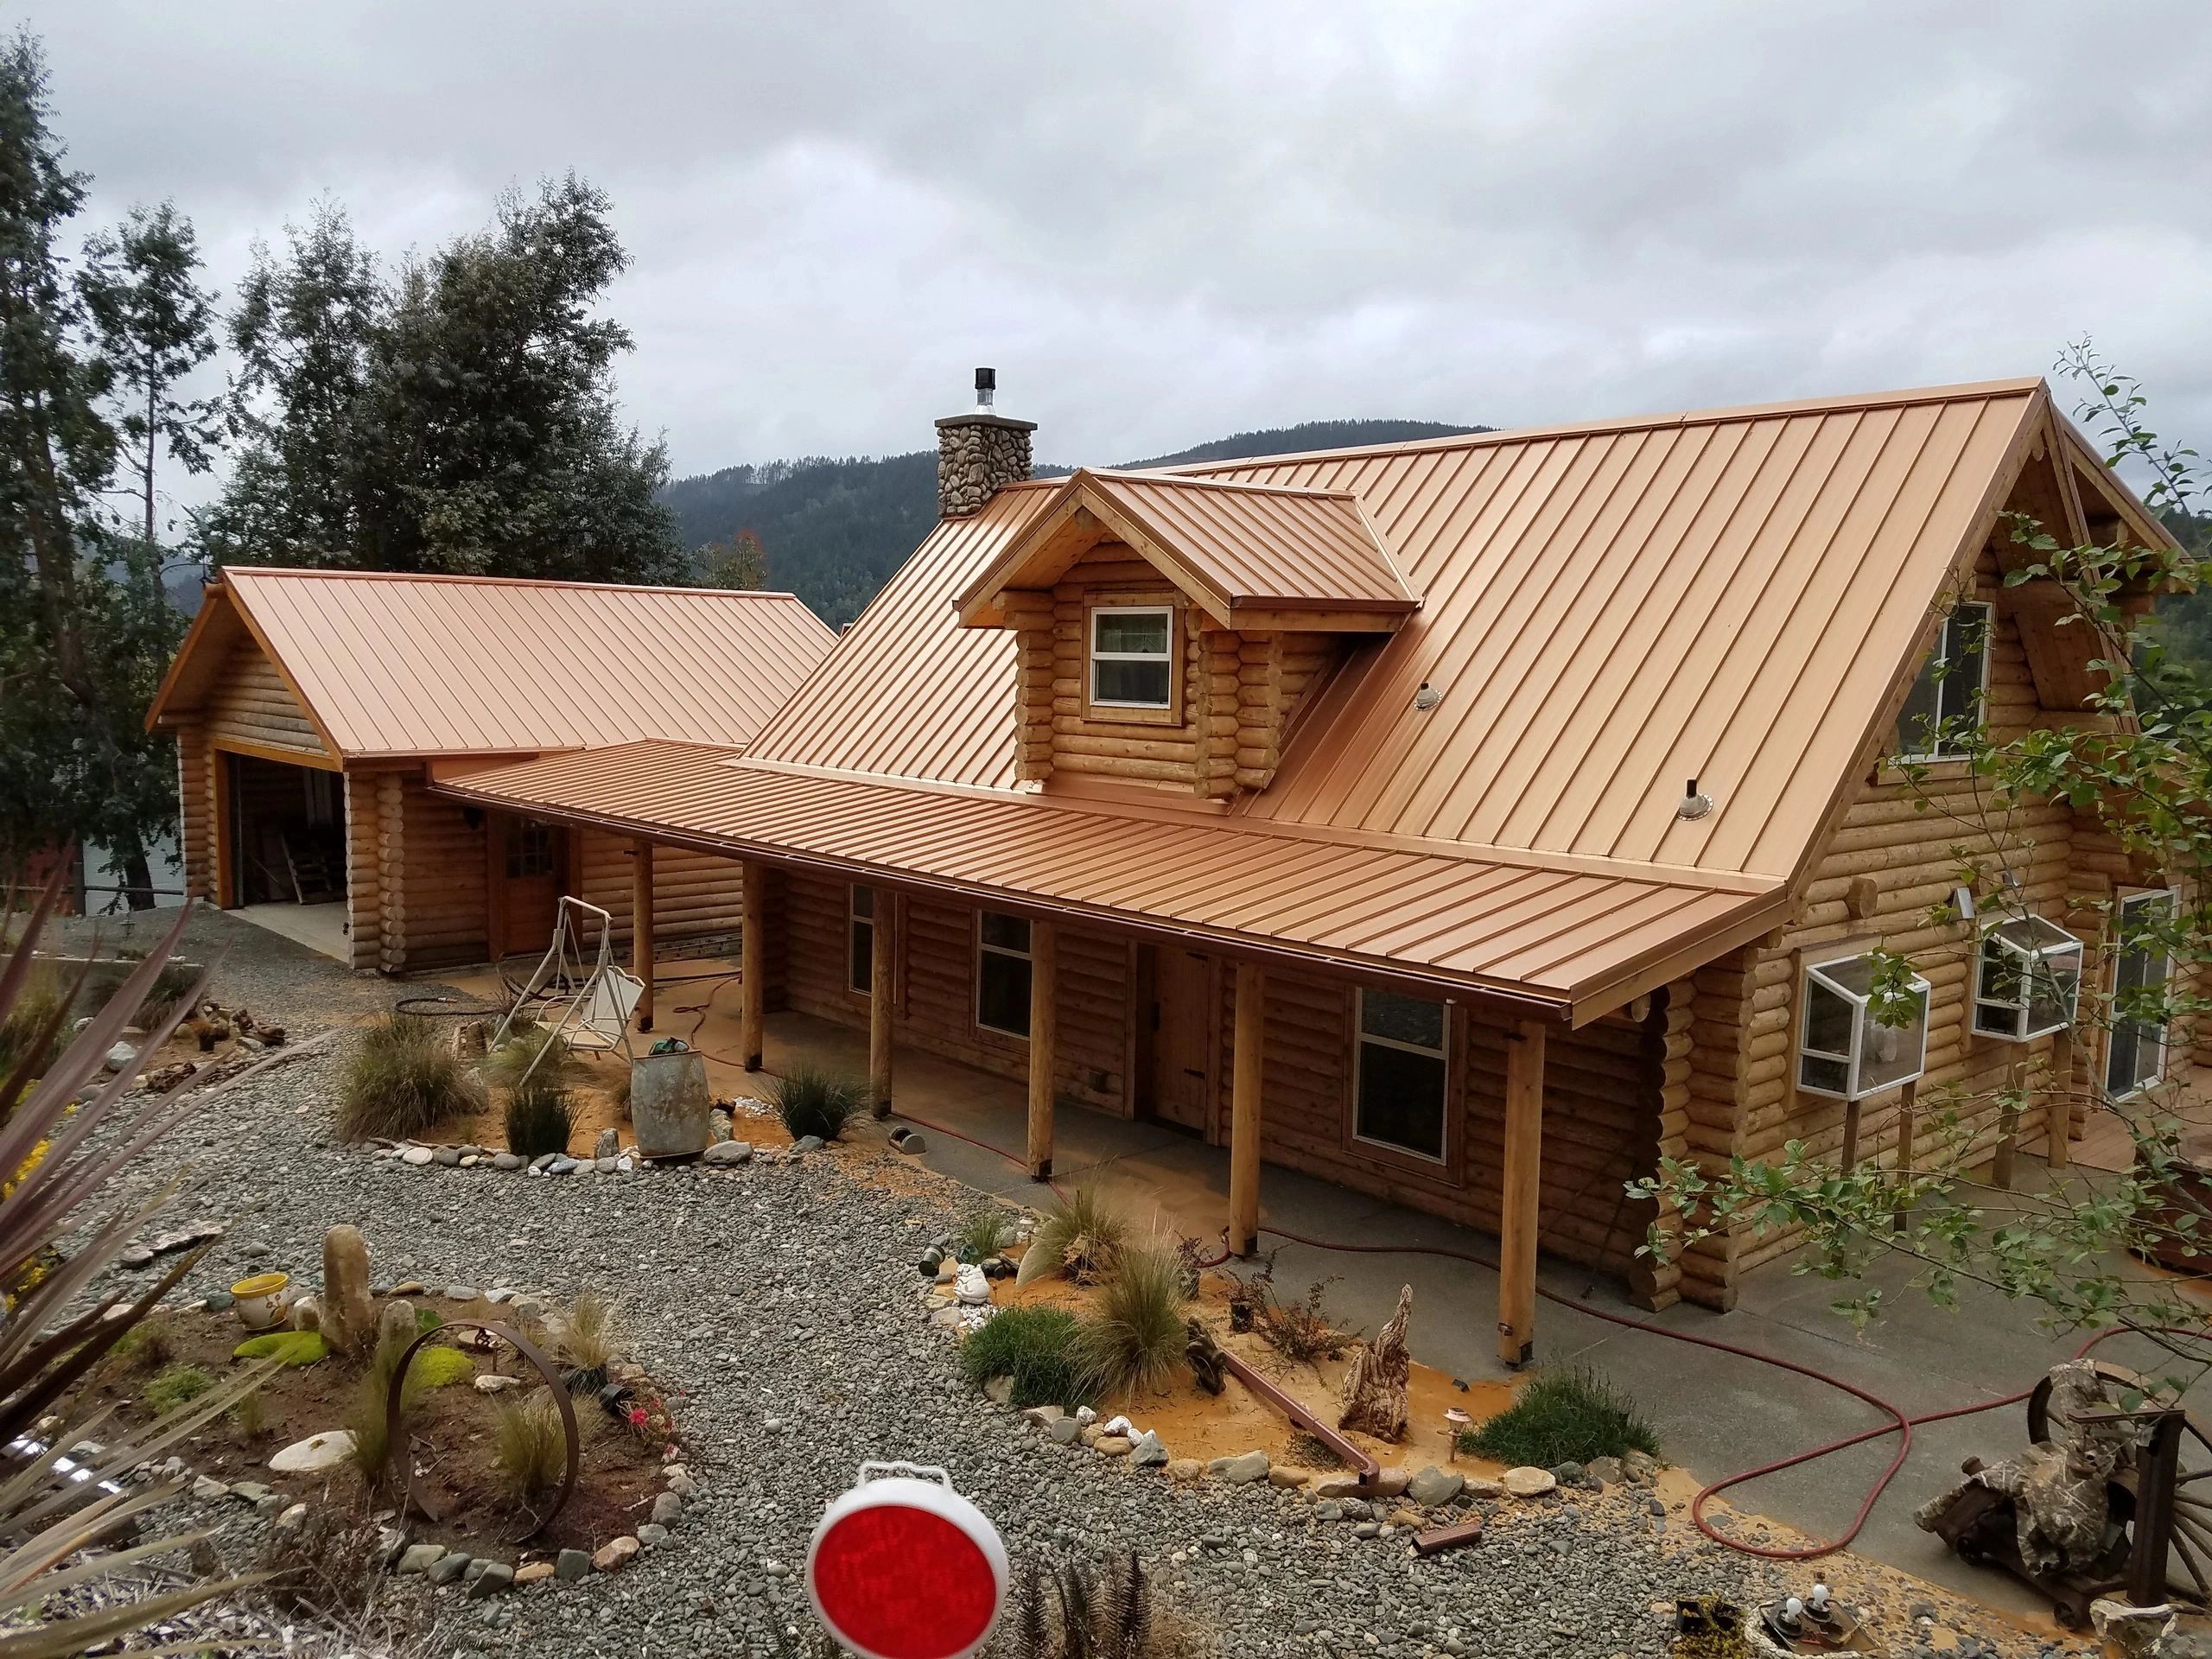 Log home refinished using Permachink systems 5-year warranty stain and chinking.